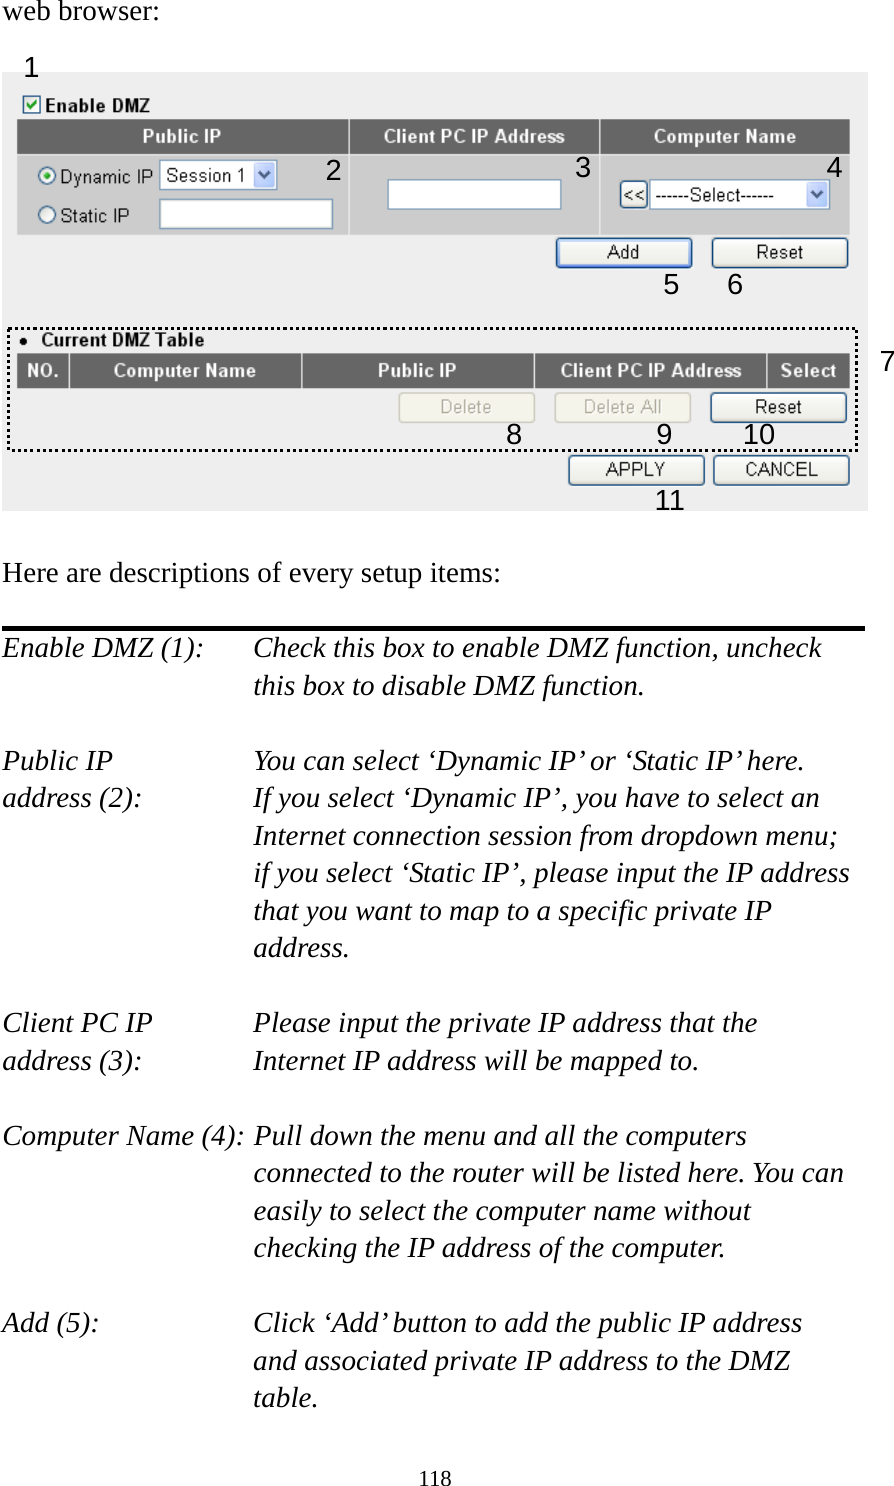 118 web browser:    Here are descriptions of every setup items:  Enable DMZ (1):    Check this box to enable DMZ function, uncheck this box to disable DMZ function.  Public IP        You can select ‘Dynamic IP’ or ‘Static IP’ here. address (2):    If you select ‘Dynamic IP’, you have to select an Internet connection session from dropdown menu; if you select ‘Static IP’, please input the IP address that you want to map to a specific private IP address.  Client PC IP      Please input the private IP address that the address (3):      Internet IP address will be mapped to.  Computer Name (4): Pull down the menu and all the computers connected to the router will be listed here. You can easily to select the computer name without checking the IP address of the computer.  Add (5):    Click ‘Add’ button to add the public IP address and associated private IP address to the DMZ table. 1 2456 78 9 10 113